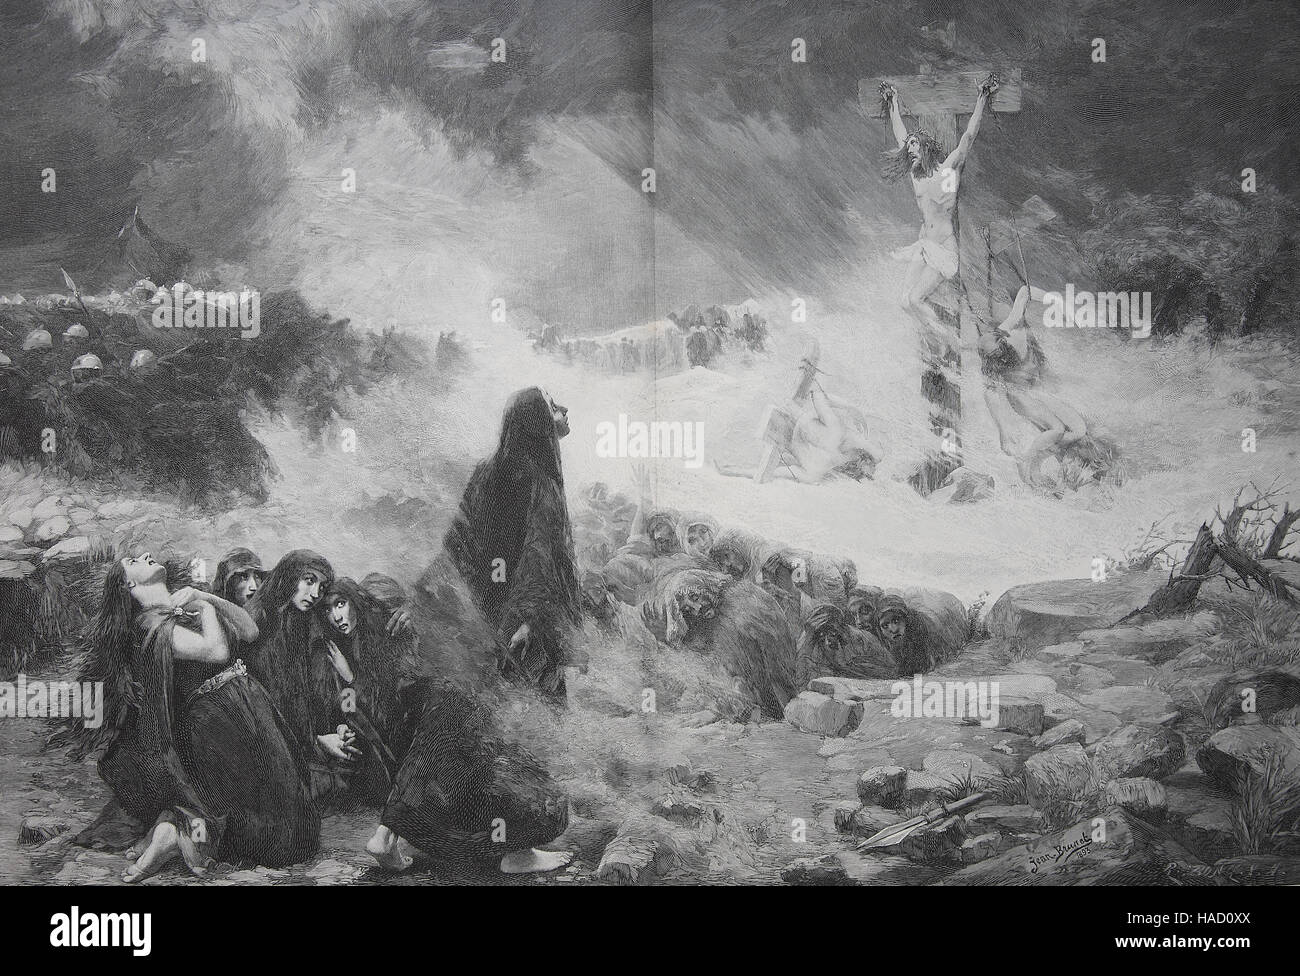 The last pain cry of Jesus Christ on the cross, by Jean Brunet, illustration published in 1880 Stock Photo